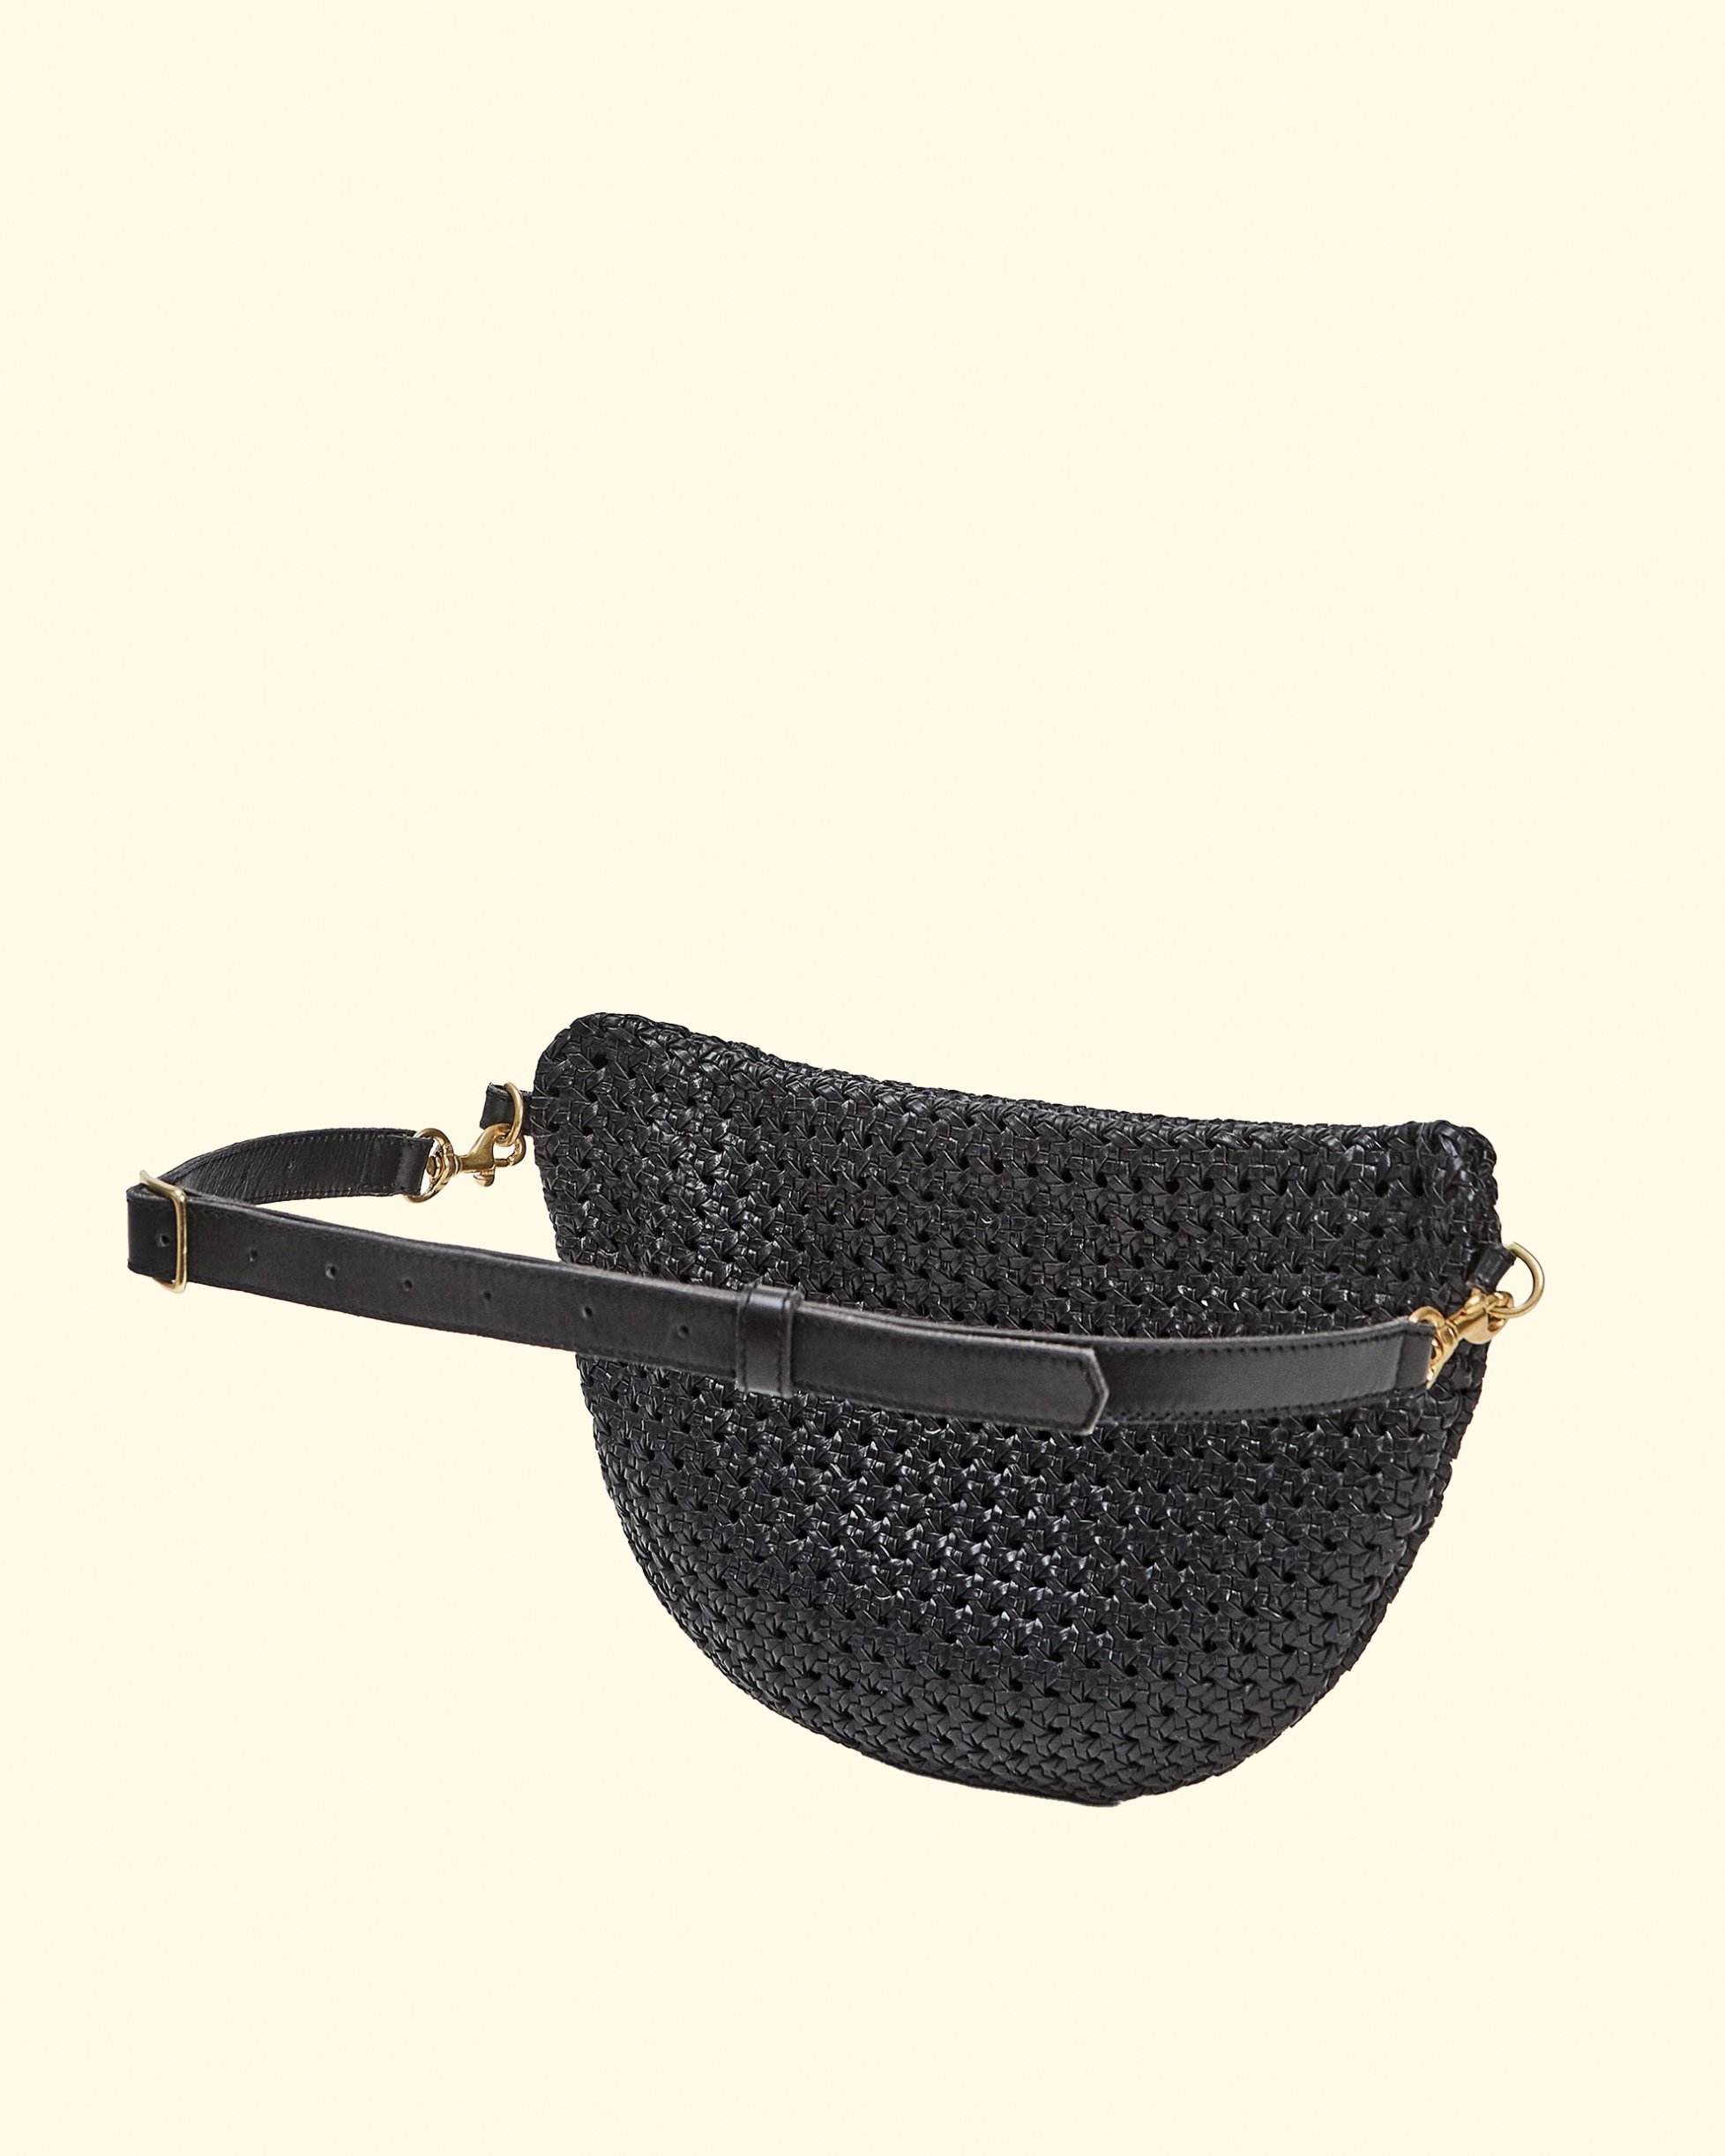 Clare V. Marisol Woven Leather Crossbody Bag in Toffee Diagonal Woven